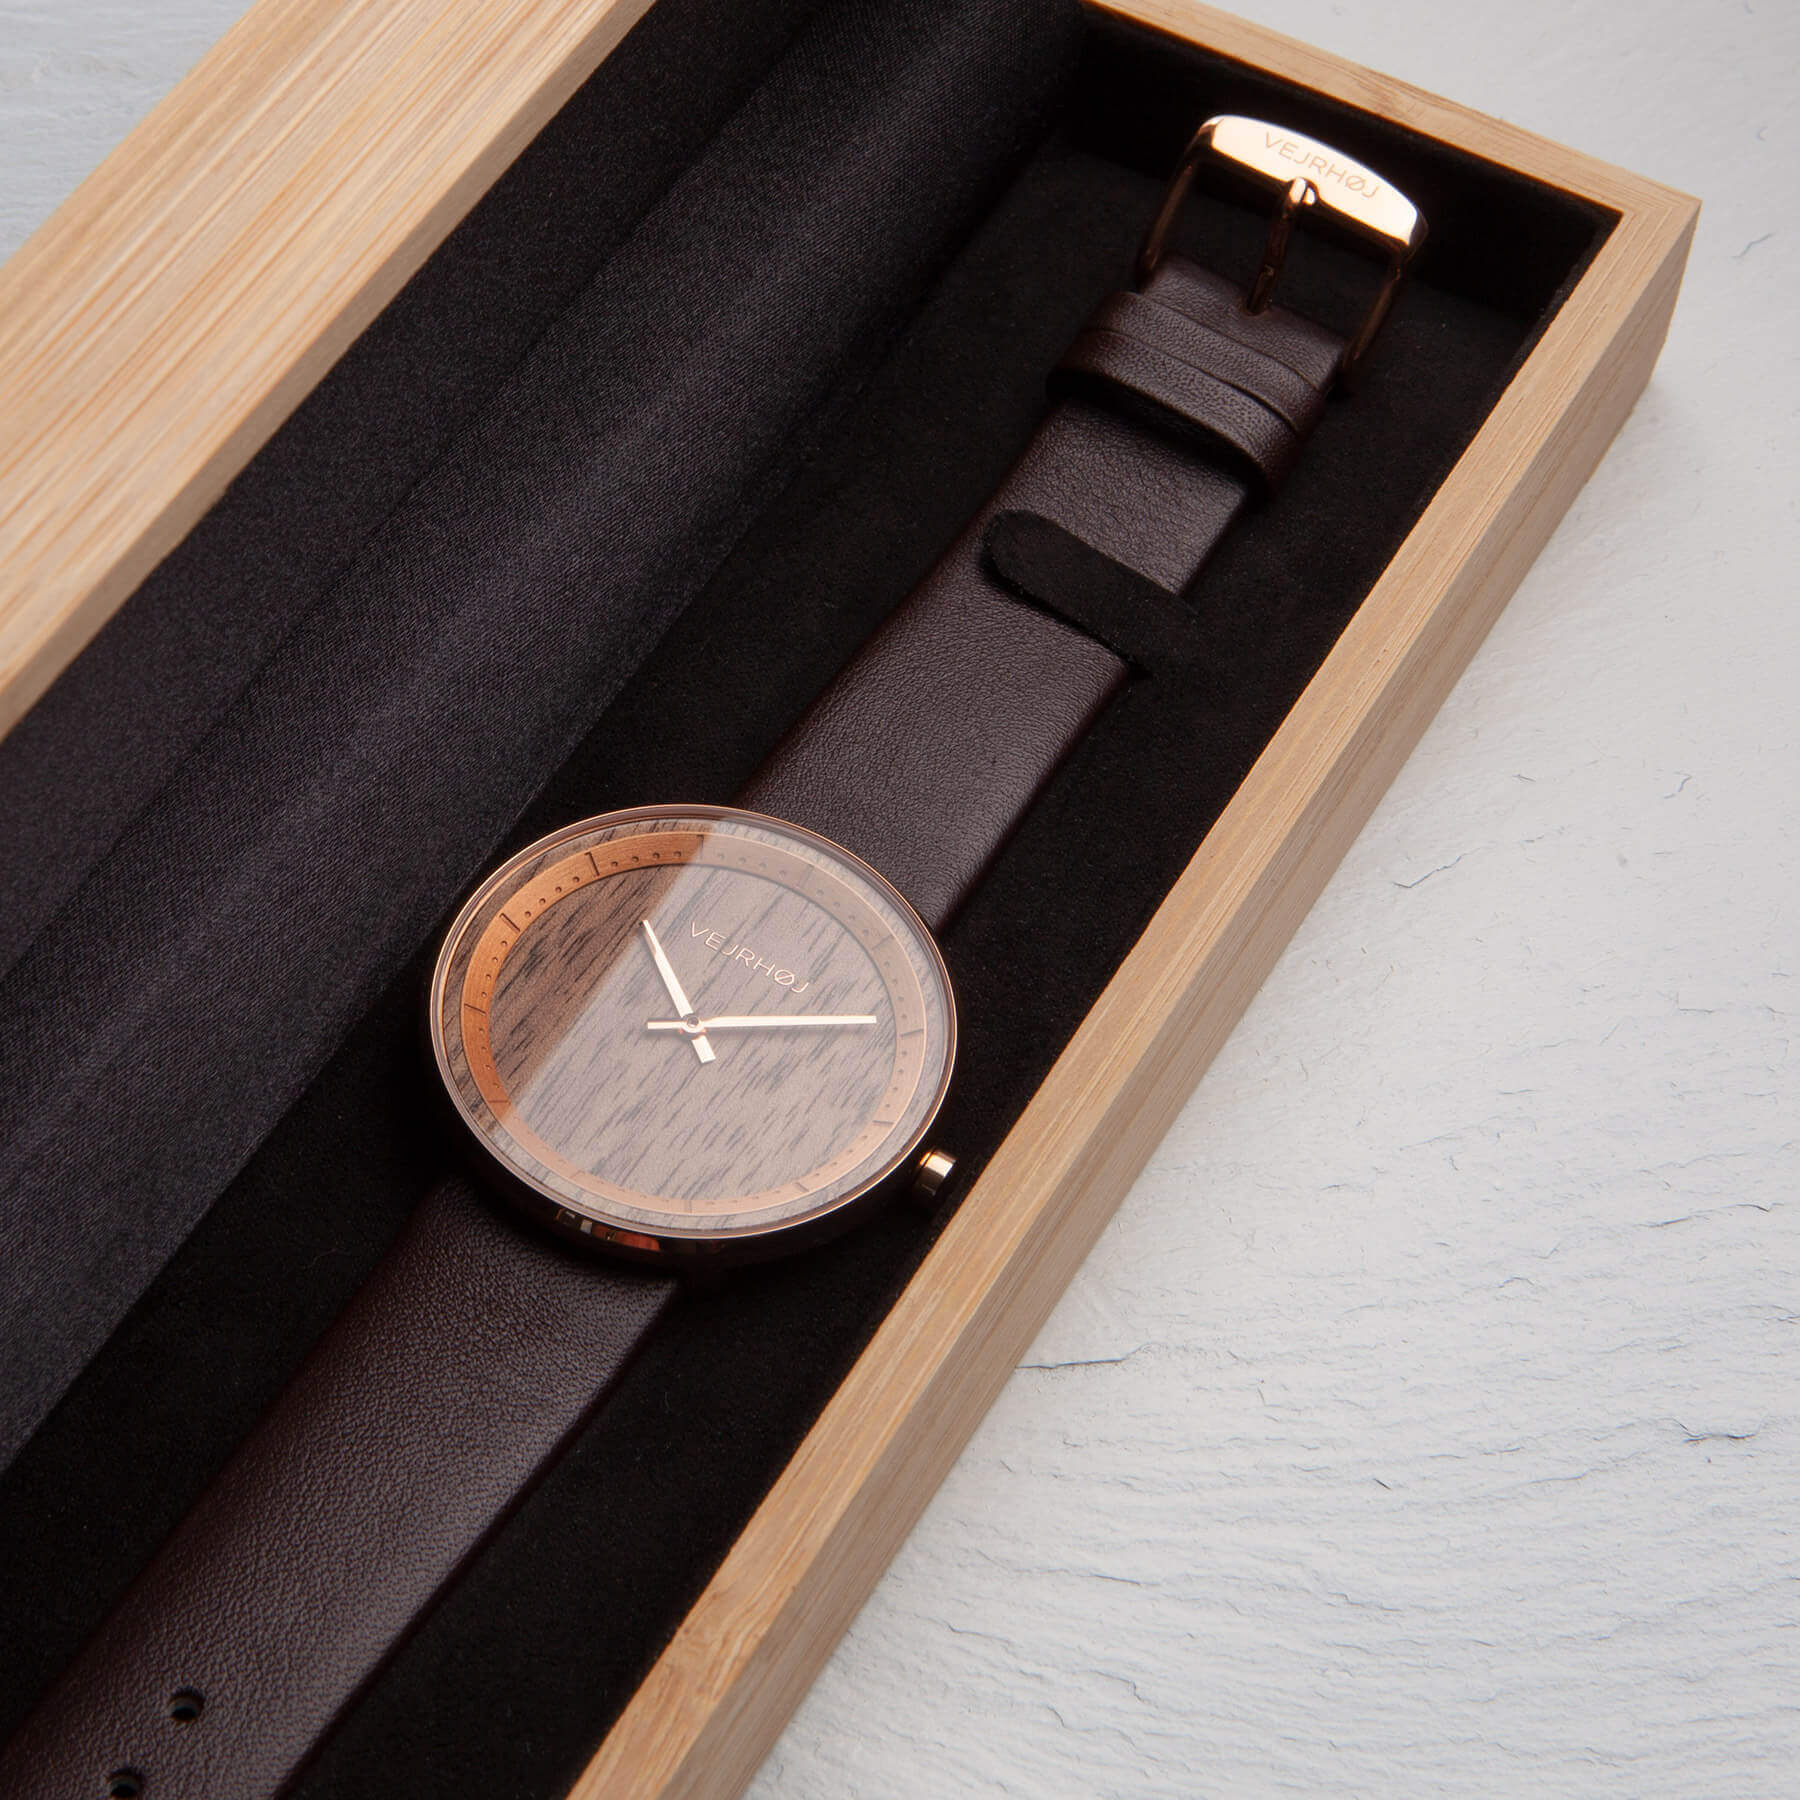 Elegant wood watch with rose gold placed in a wooden box